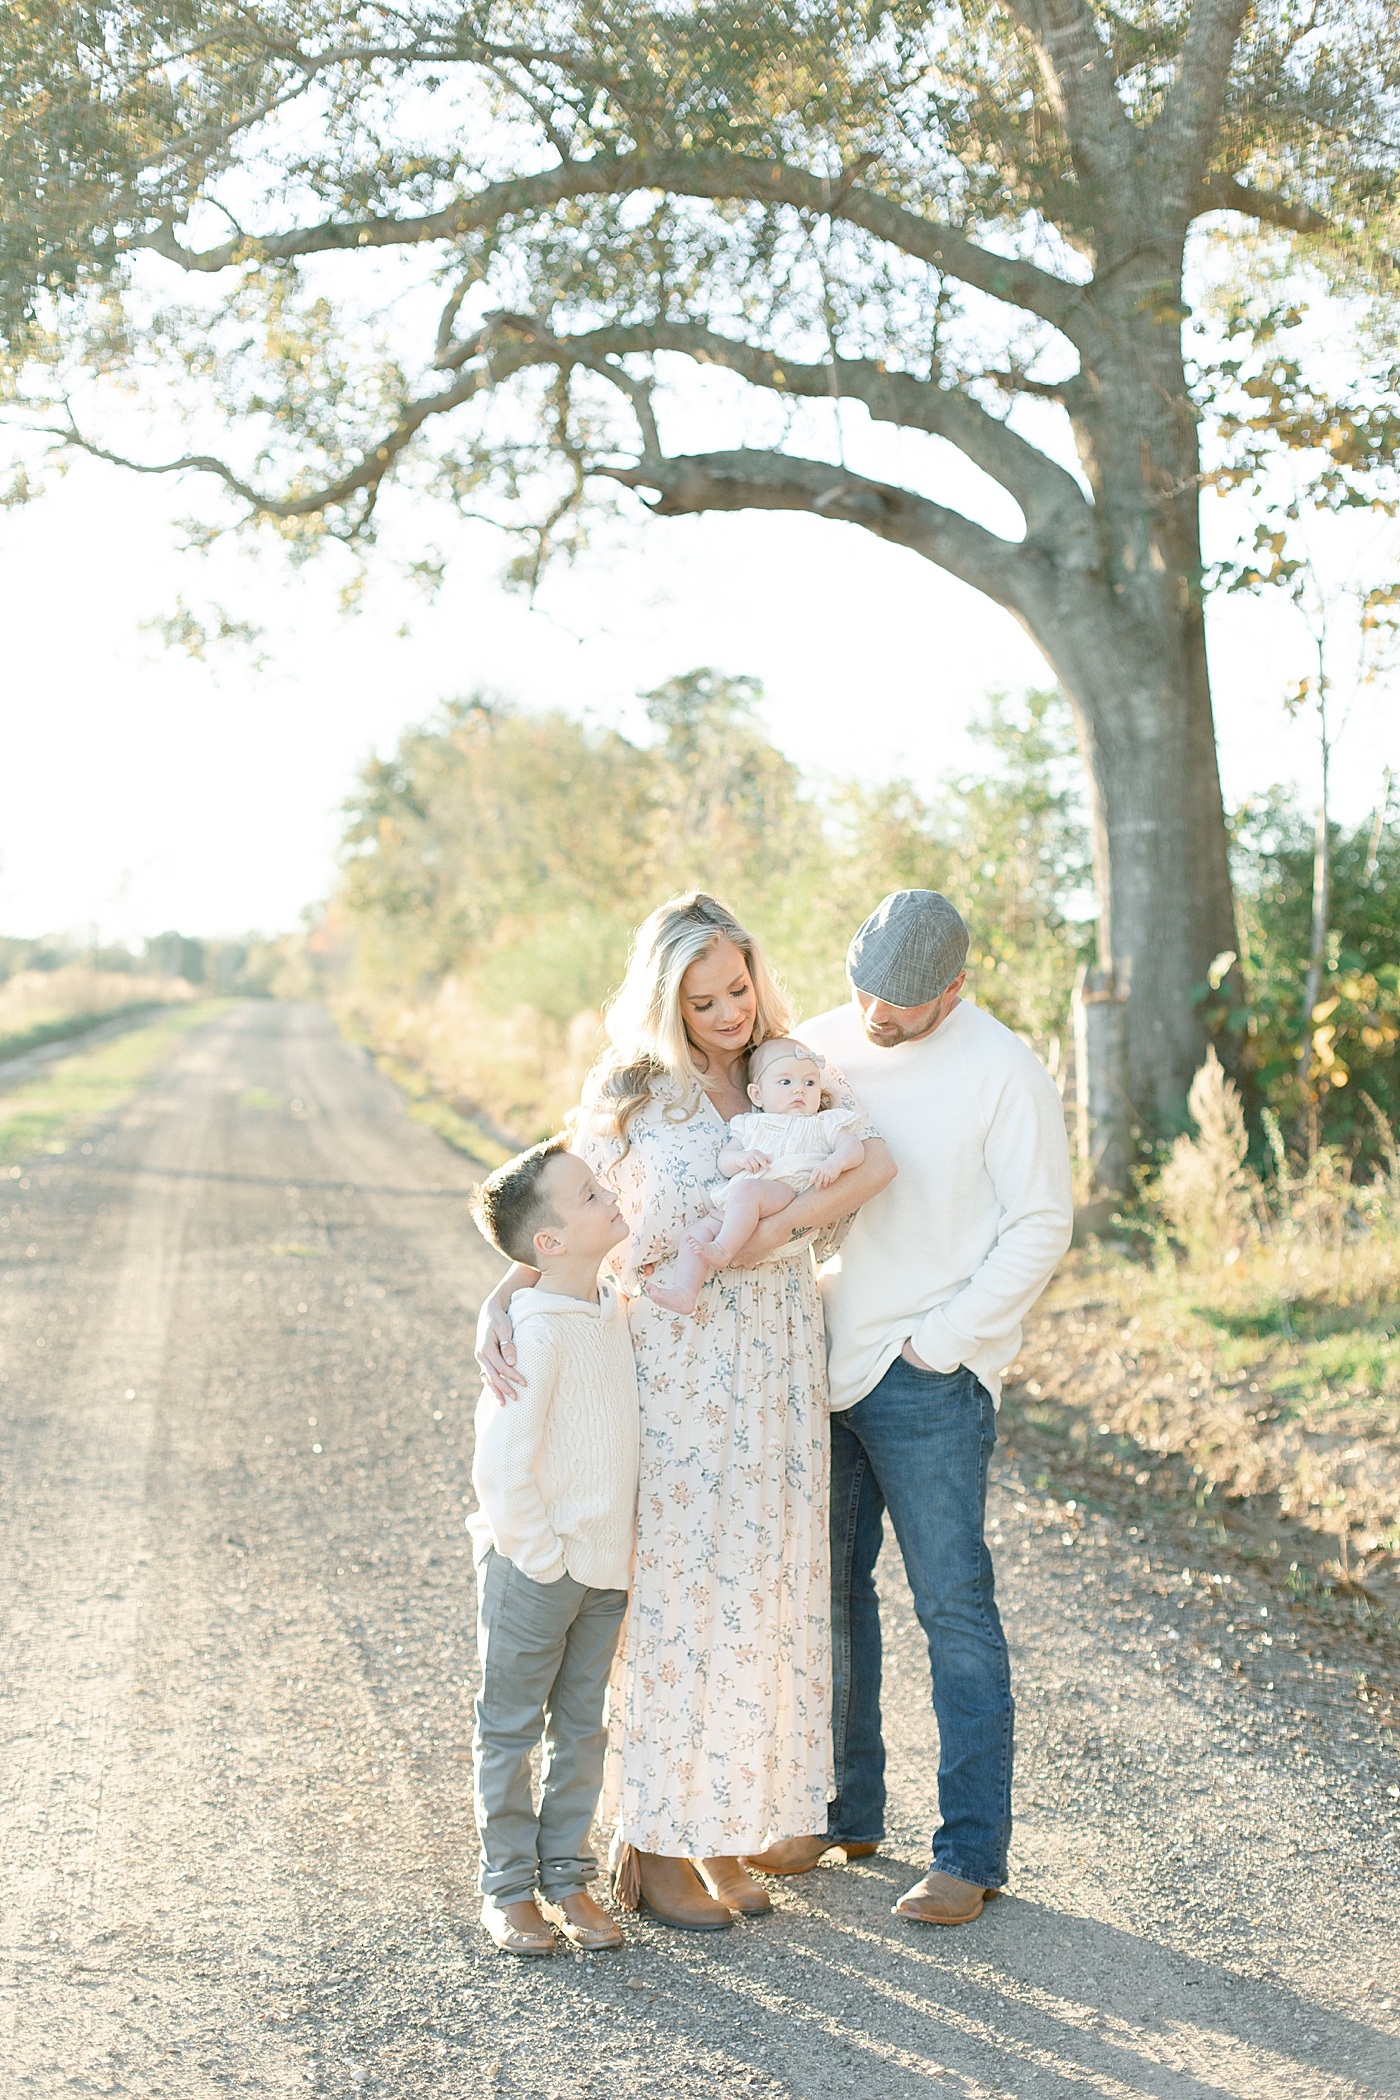 Family of four on a dirt path | Photo by Little Sunshine Photography